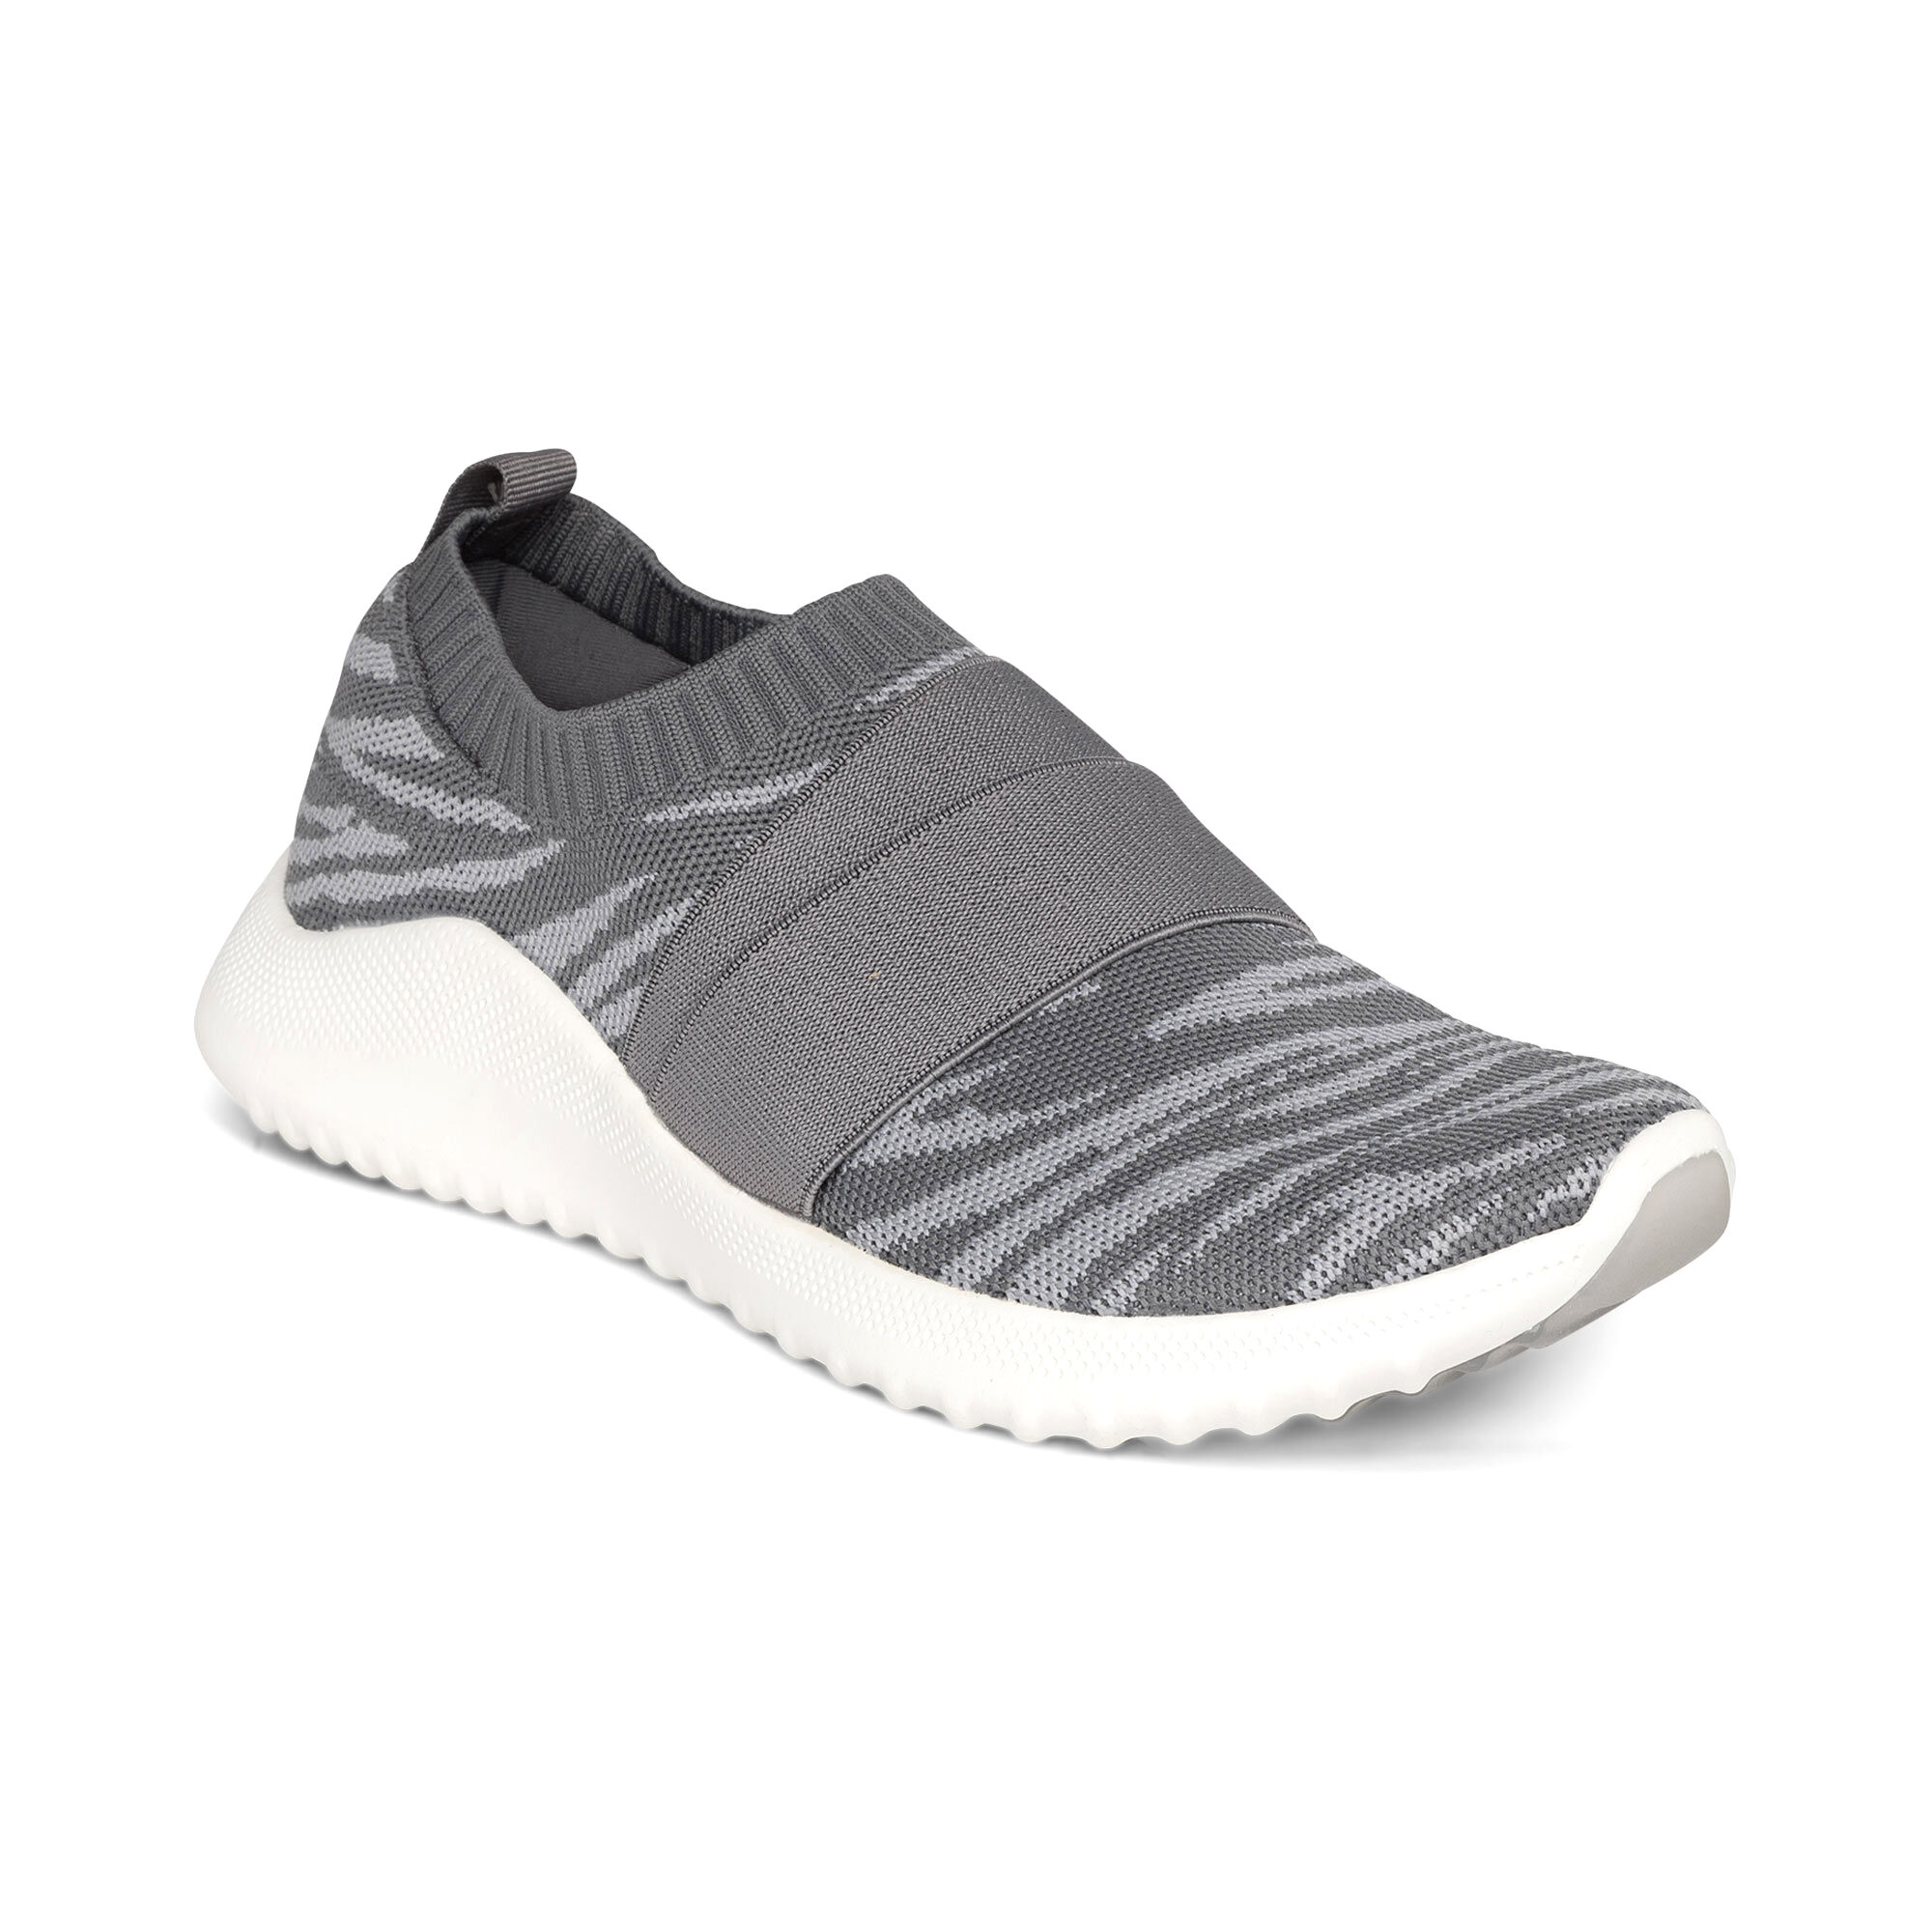 lightweight sneakers with good arch support